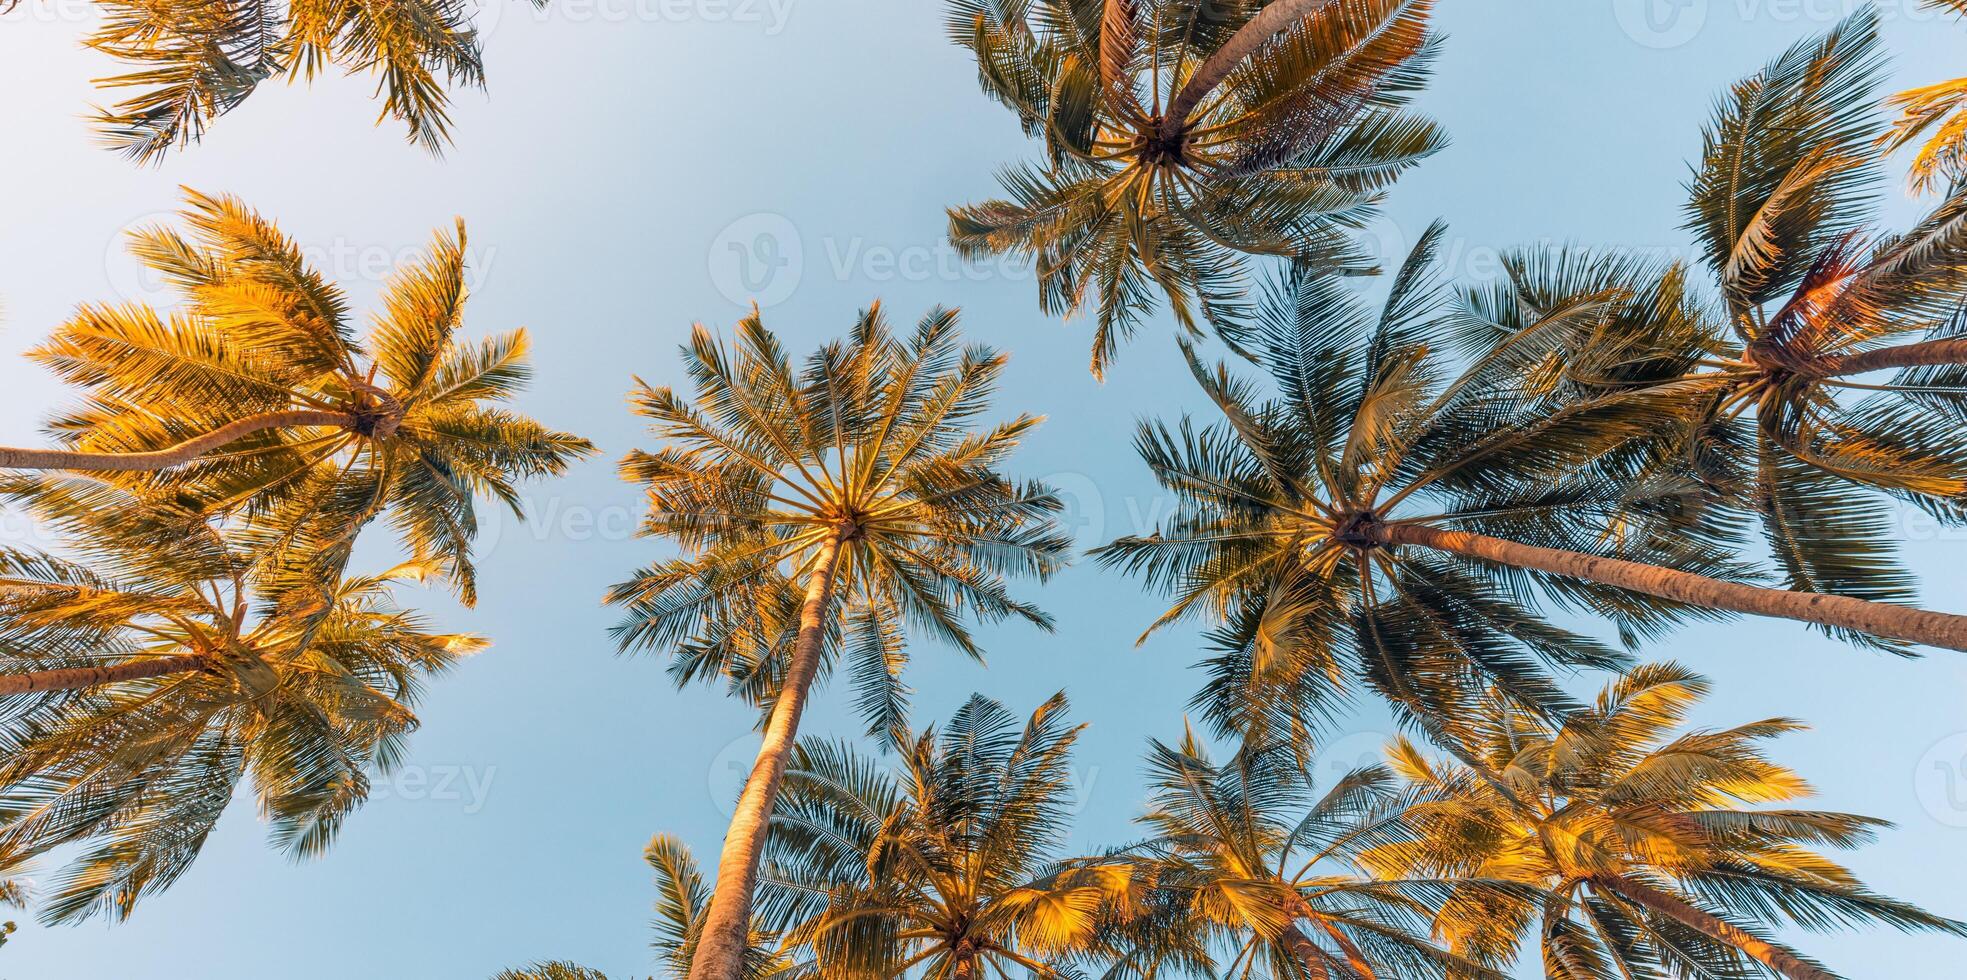 Summer vacation banner. Romantic vibes of tropical palm tree sunlight on sky background. Outdoor sunset exotic foliage closeup nature landscape. Coconut palm trees shining sun over bright sky panorama photo